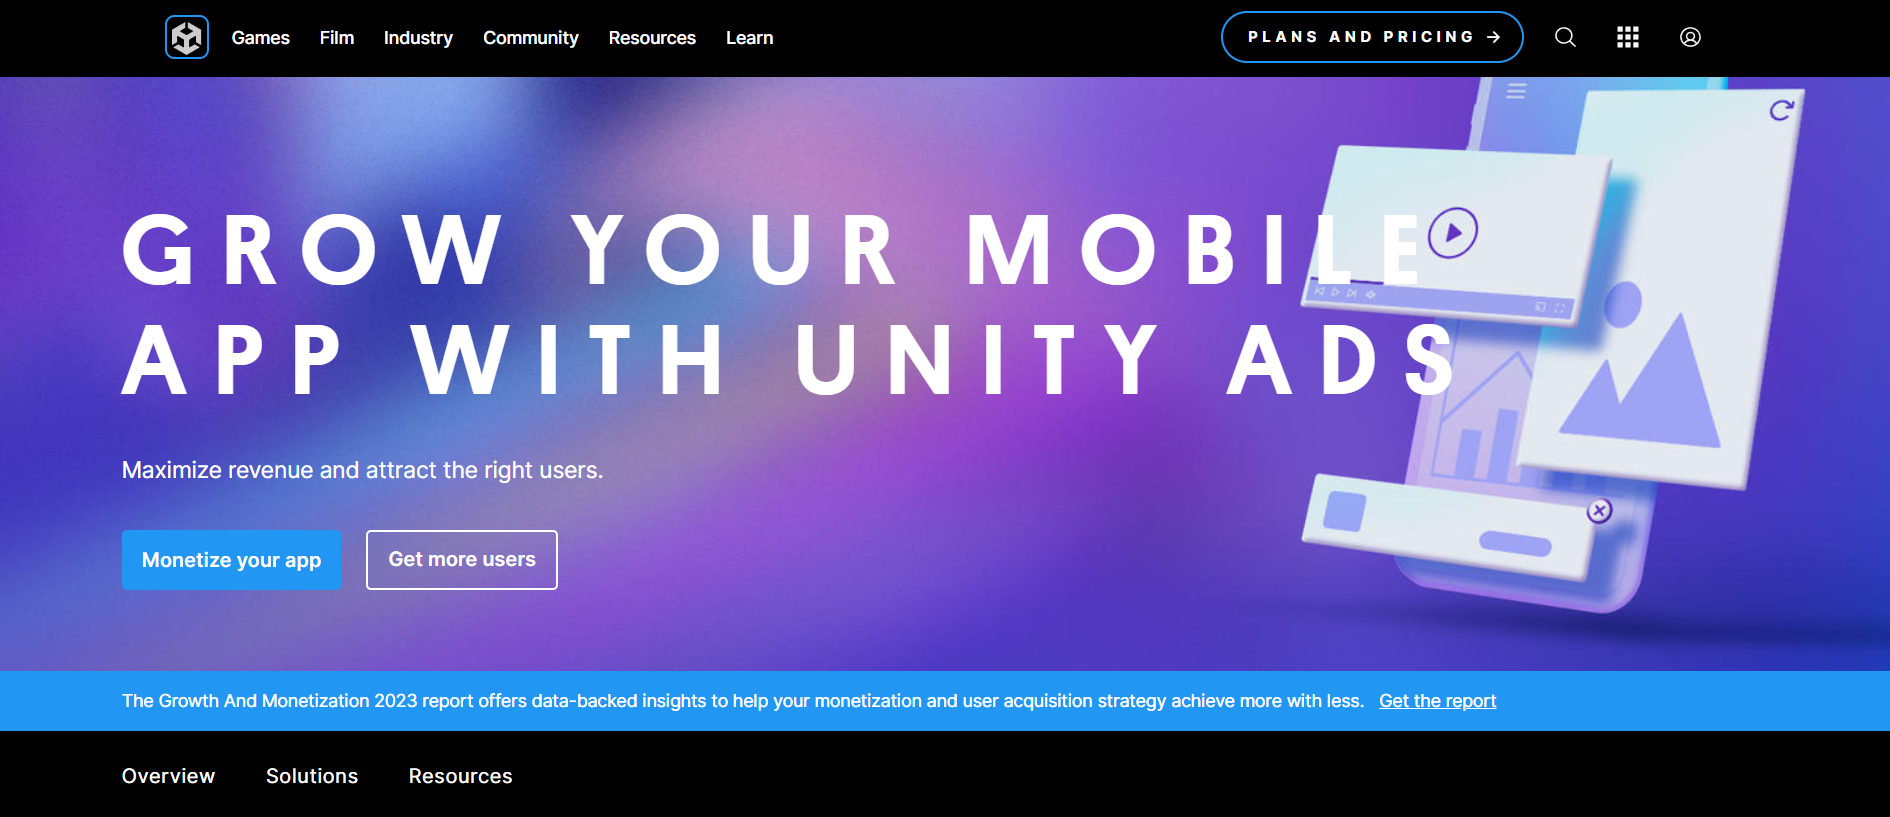 Unity Ads Overview